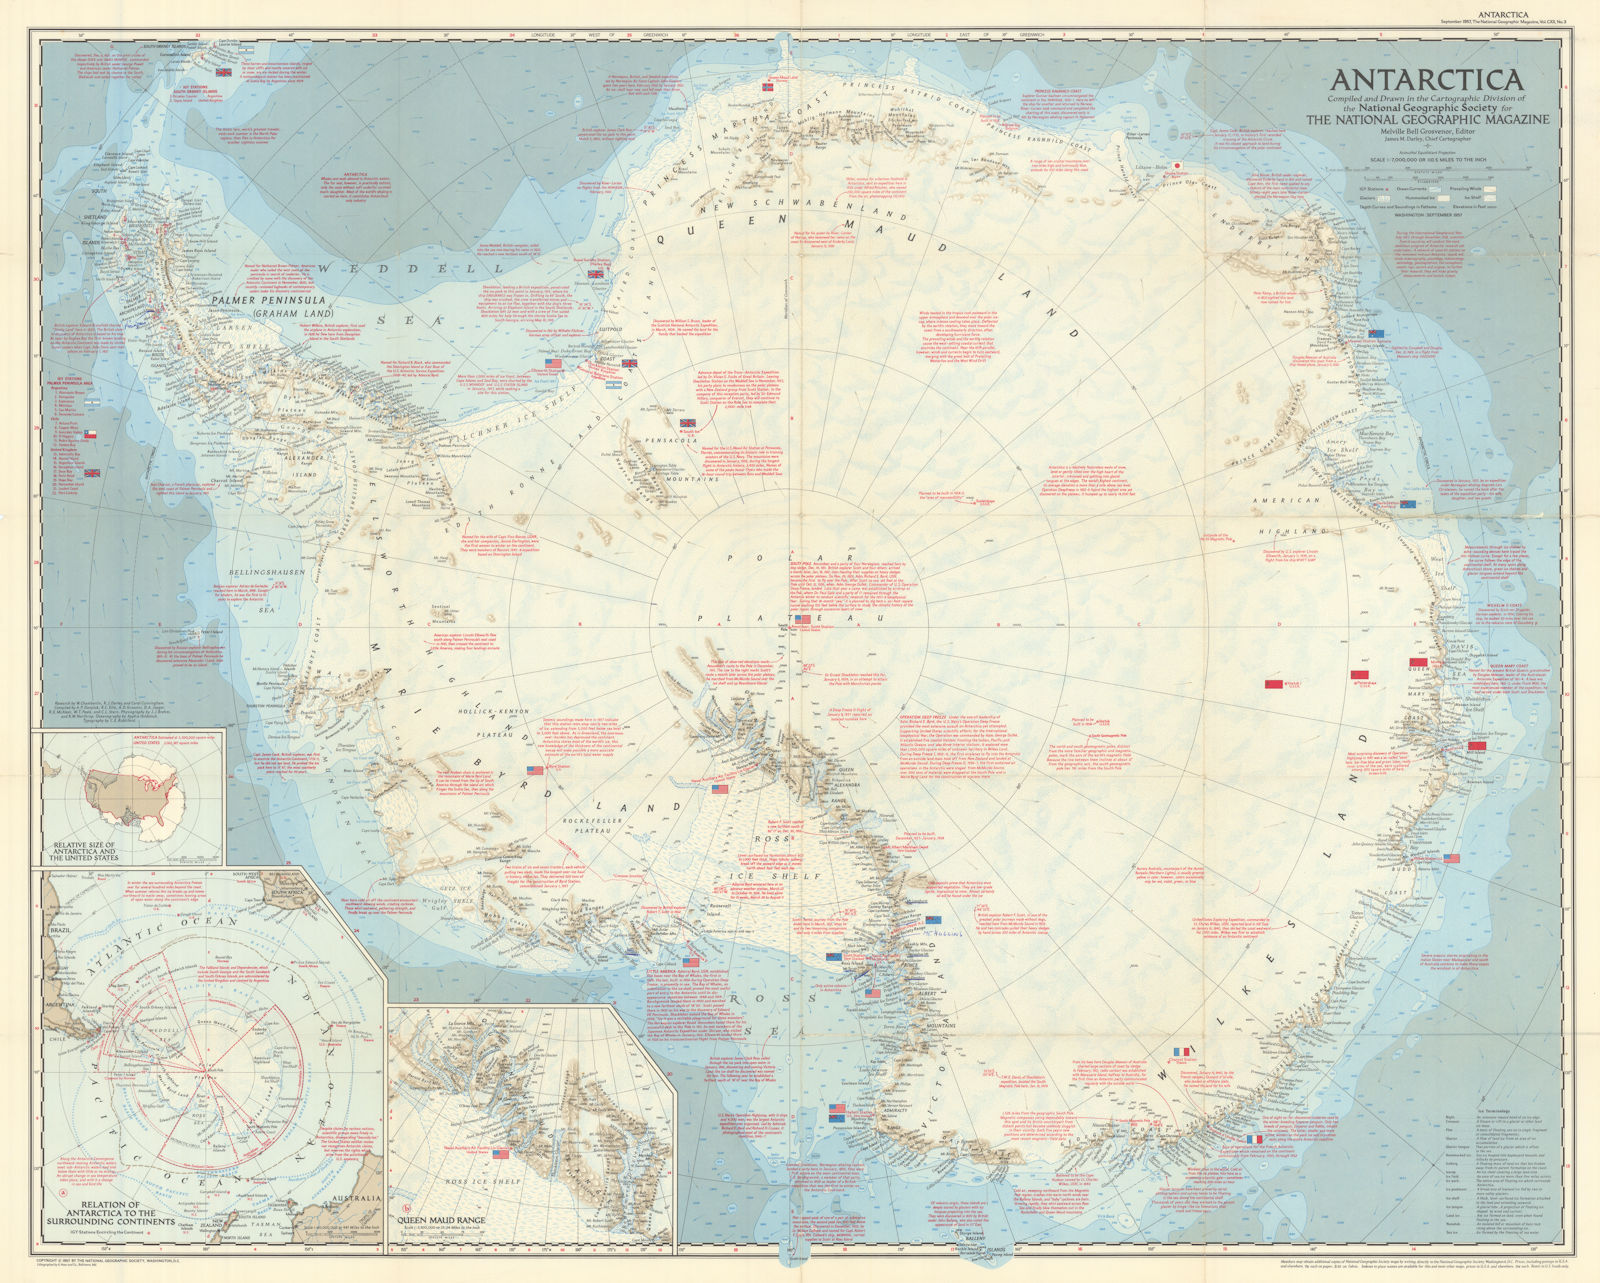 Antarctica. National Geographic map for the International Geophysical Year 1957